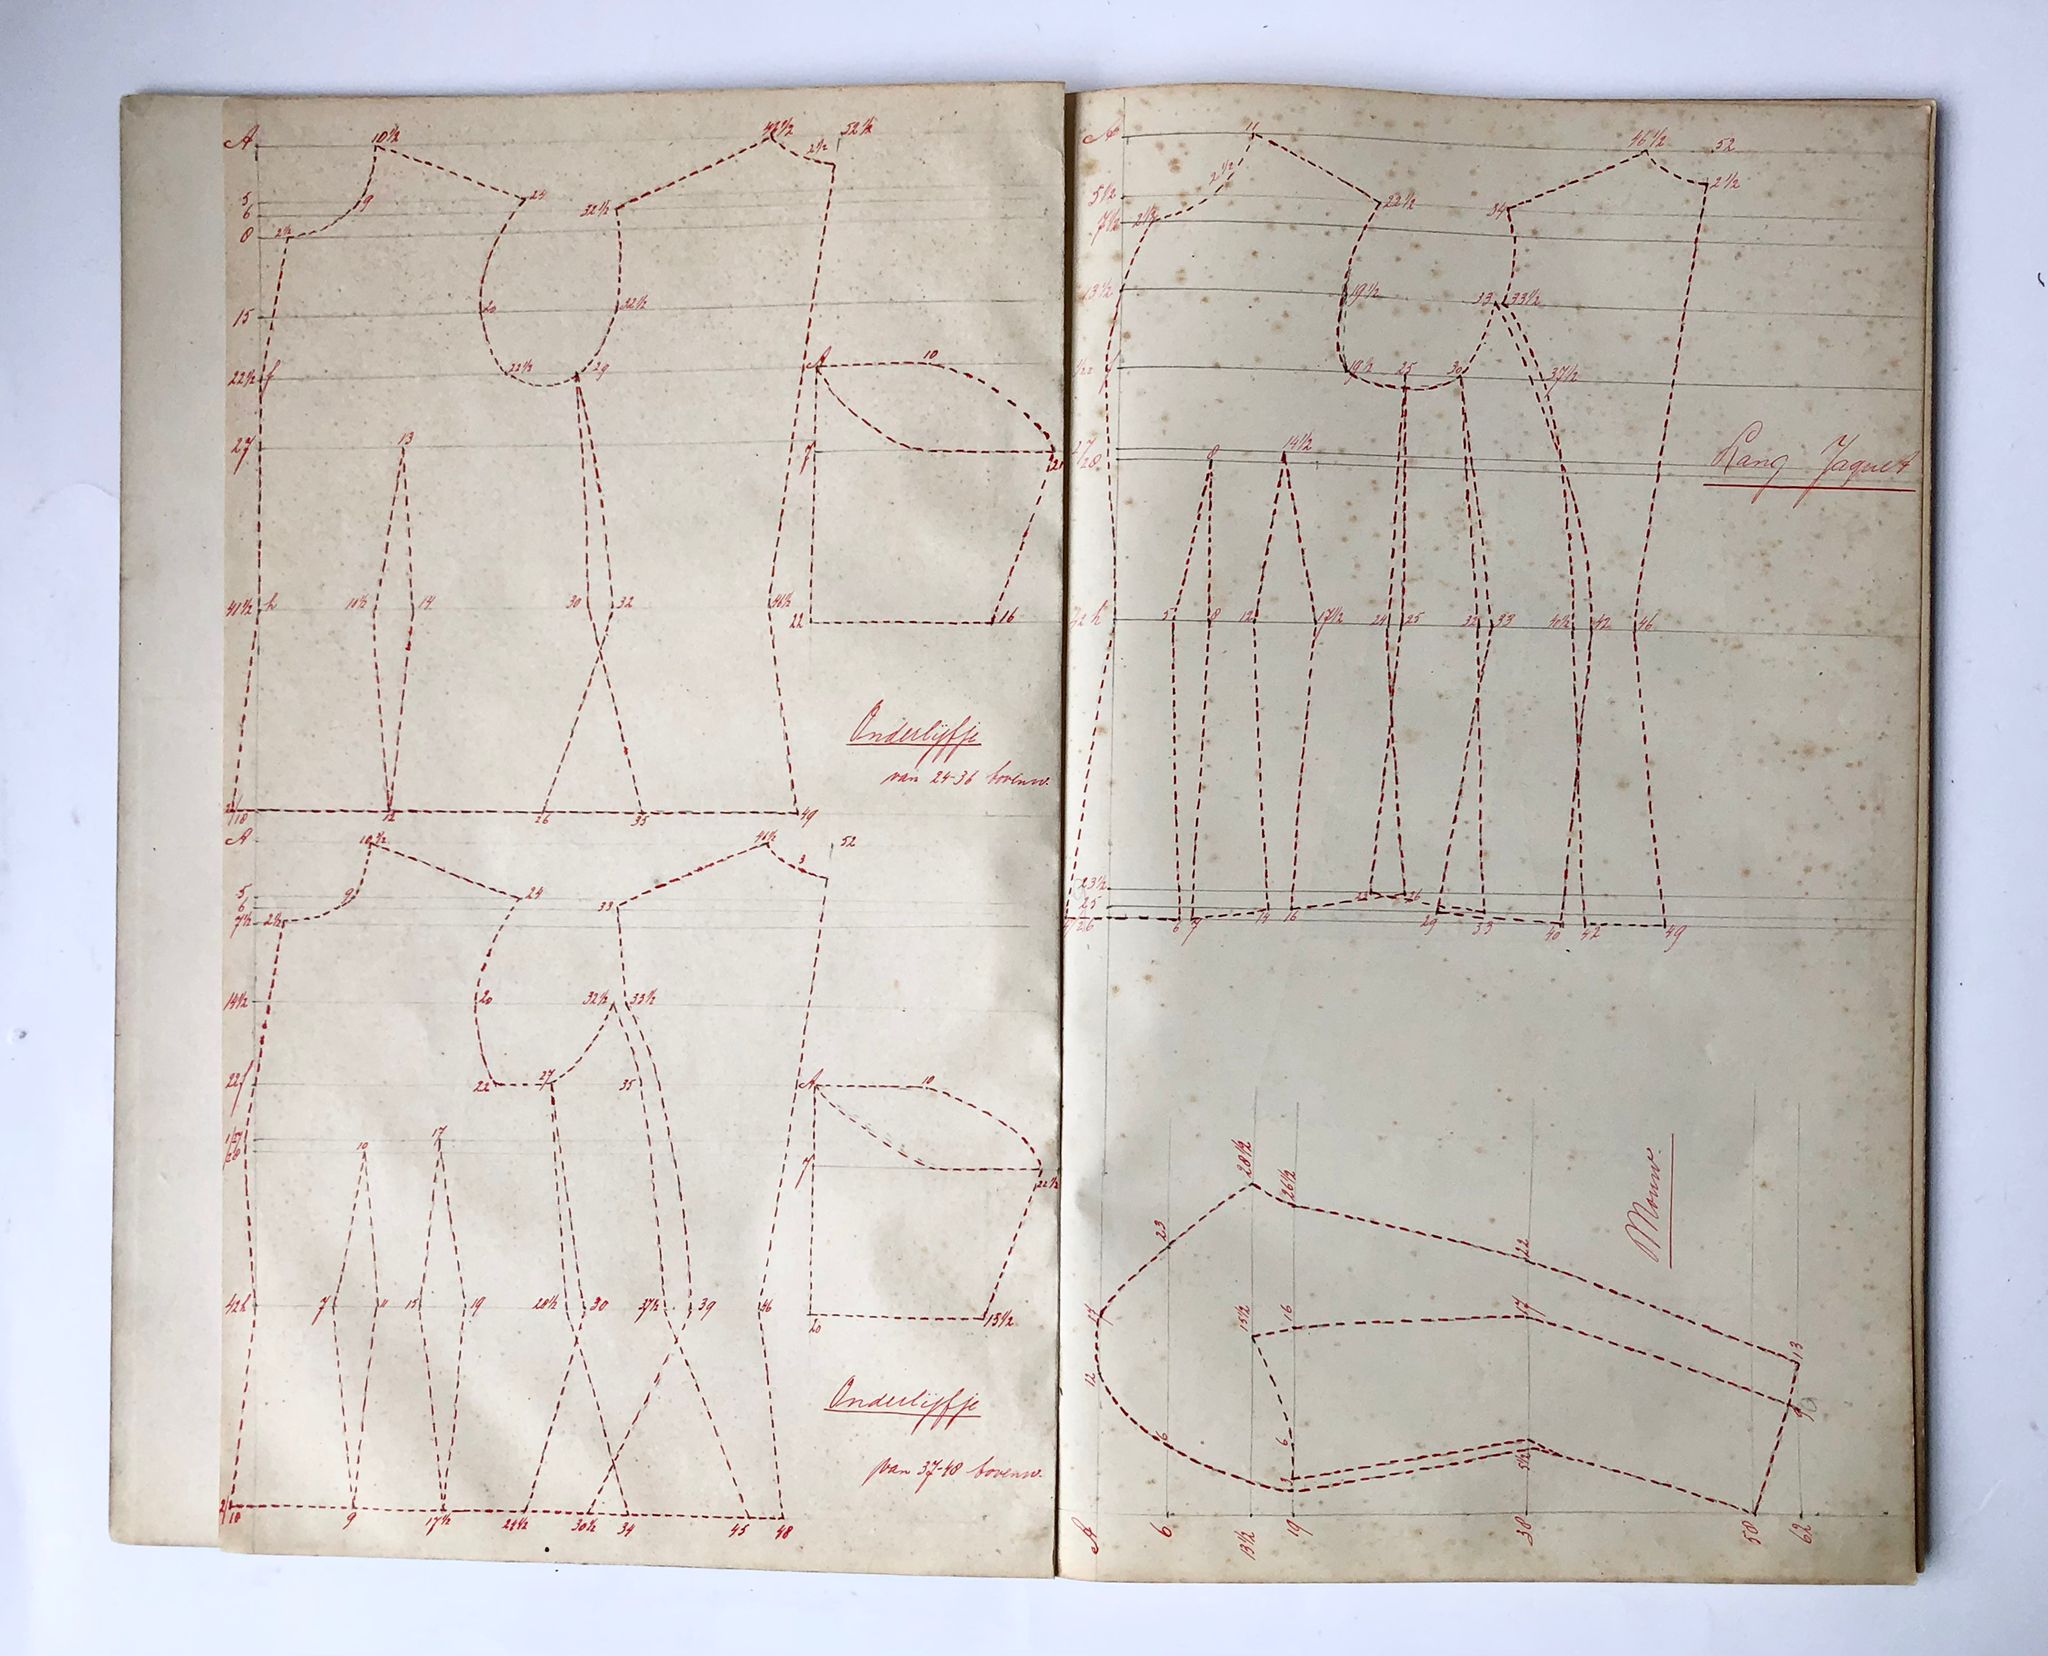  - [Fashion, pattern drawings, ca 1930] Notebook with pattern drawings of Lucie Boersma, 1930. Manuscript, folio.